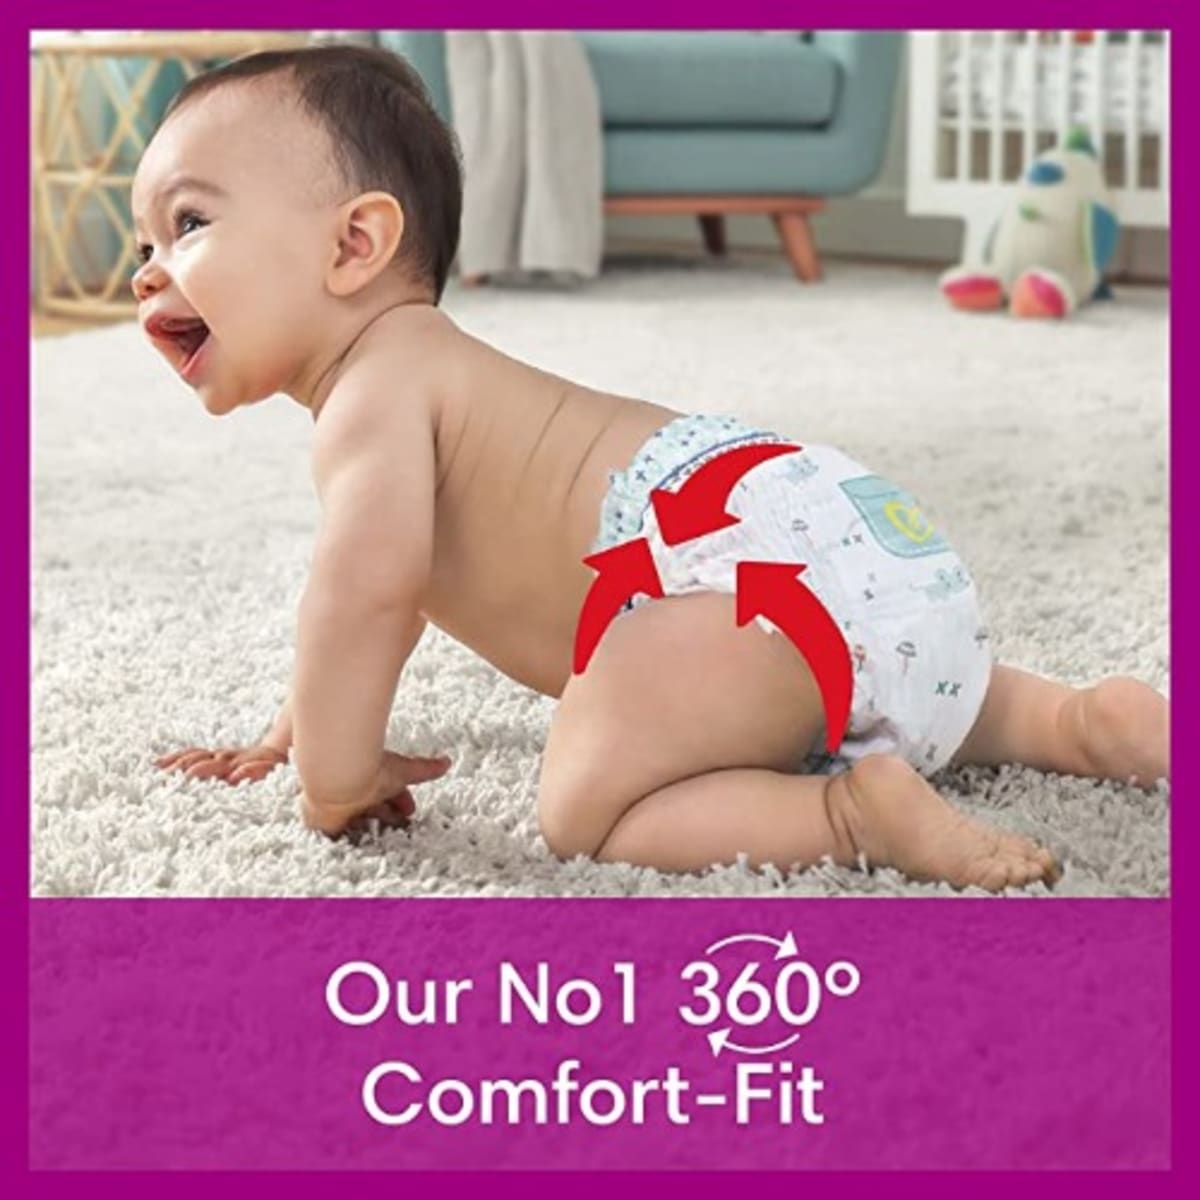 PAMPERS ACTIVE FIT NAPPY PANTS SIZE 4 x30/Pack, 9-15kg ESSENTIAL PACK